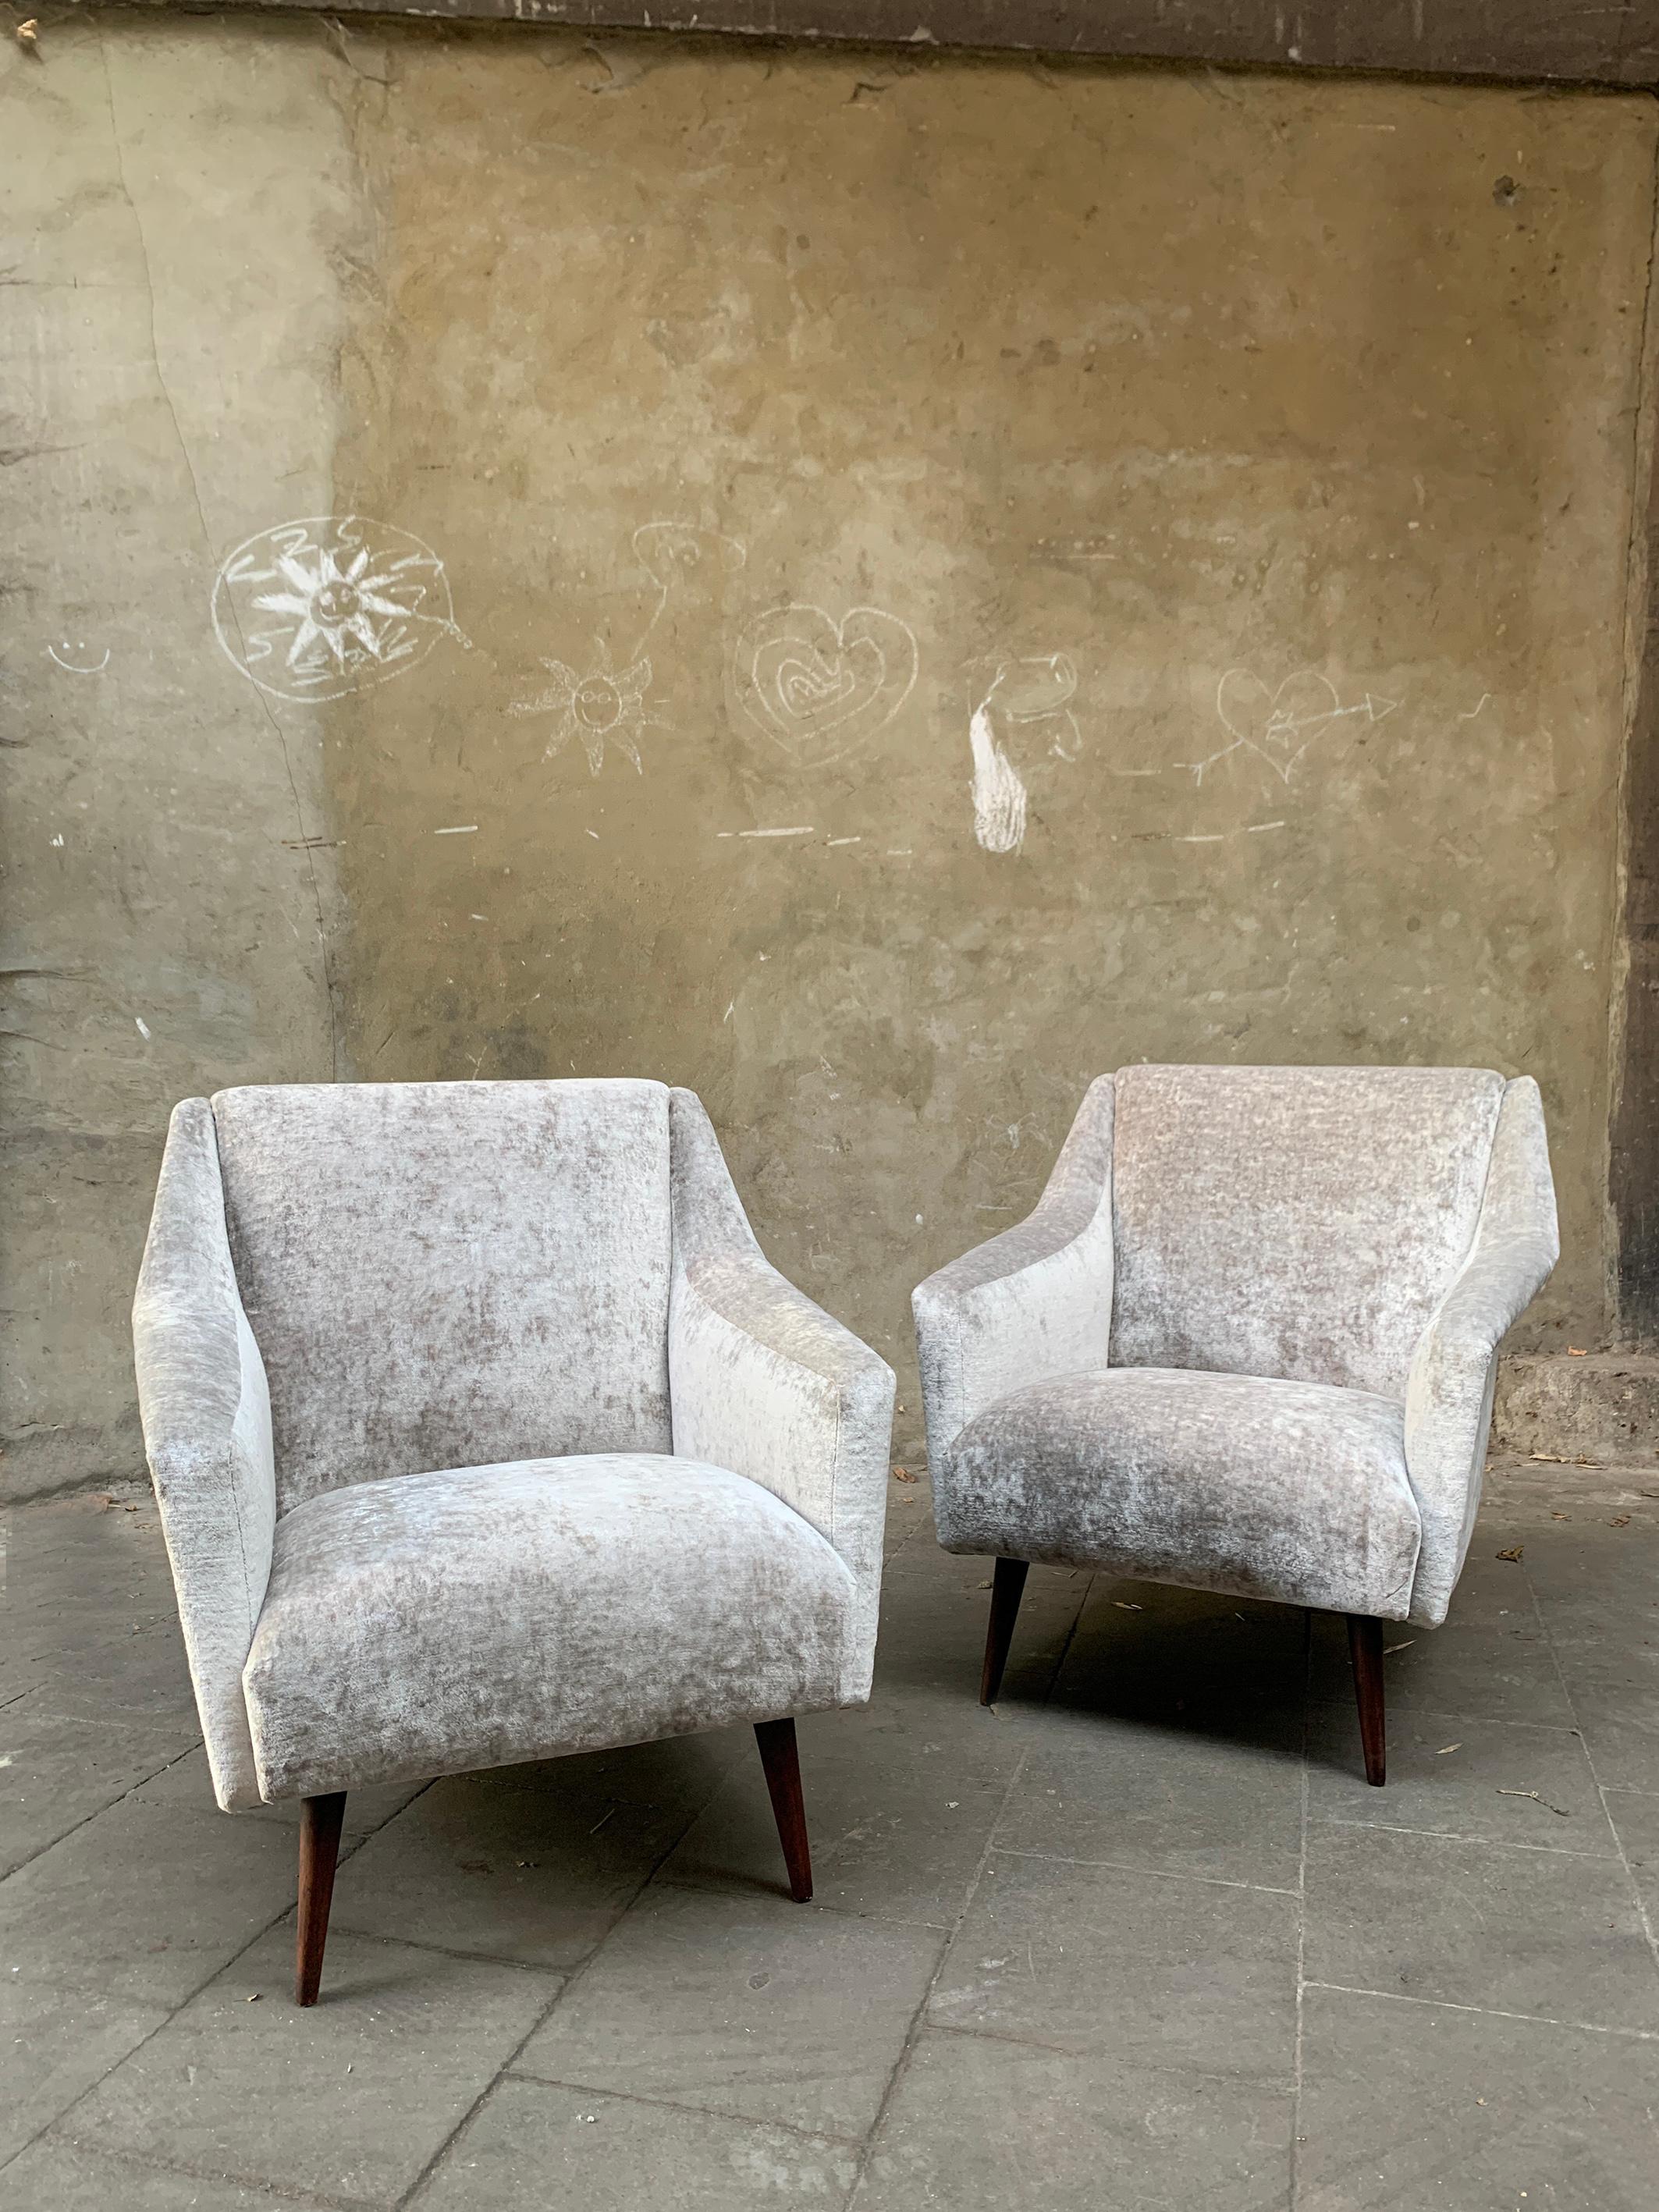 Pair of very elegant vintage Lounge Chairs in the style of Carlo de Carli model ‘802’ chairs. These are very similar to the 802 chair, you have to look very closely to find the differences. 

The 802 chairs were produced by Cassina. They have been